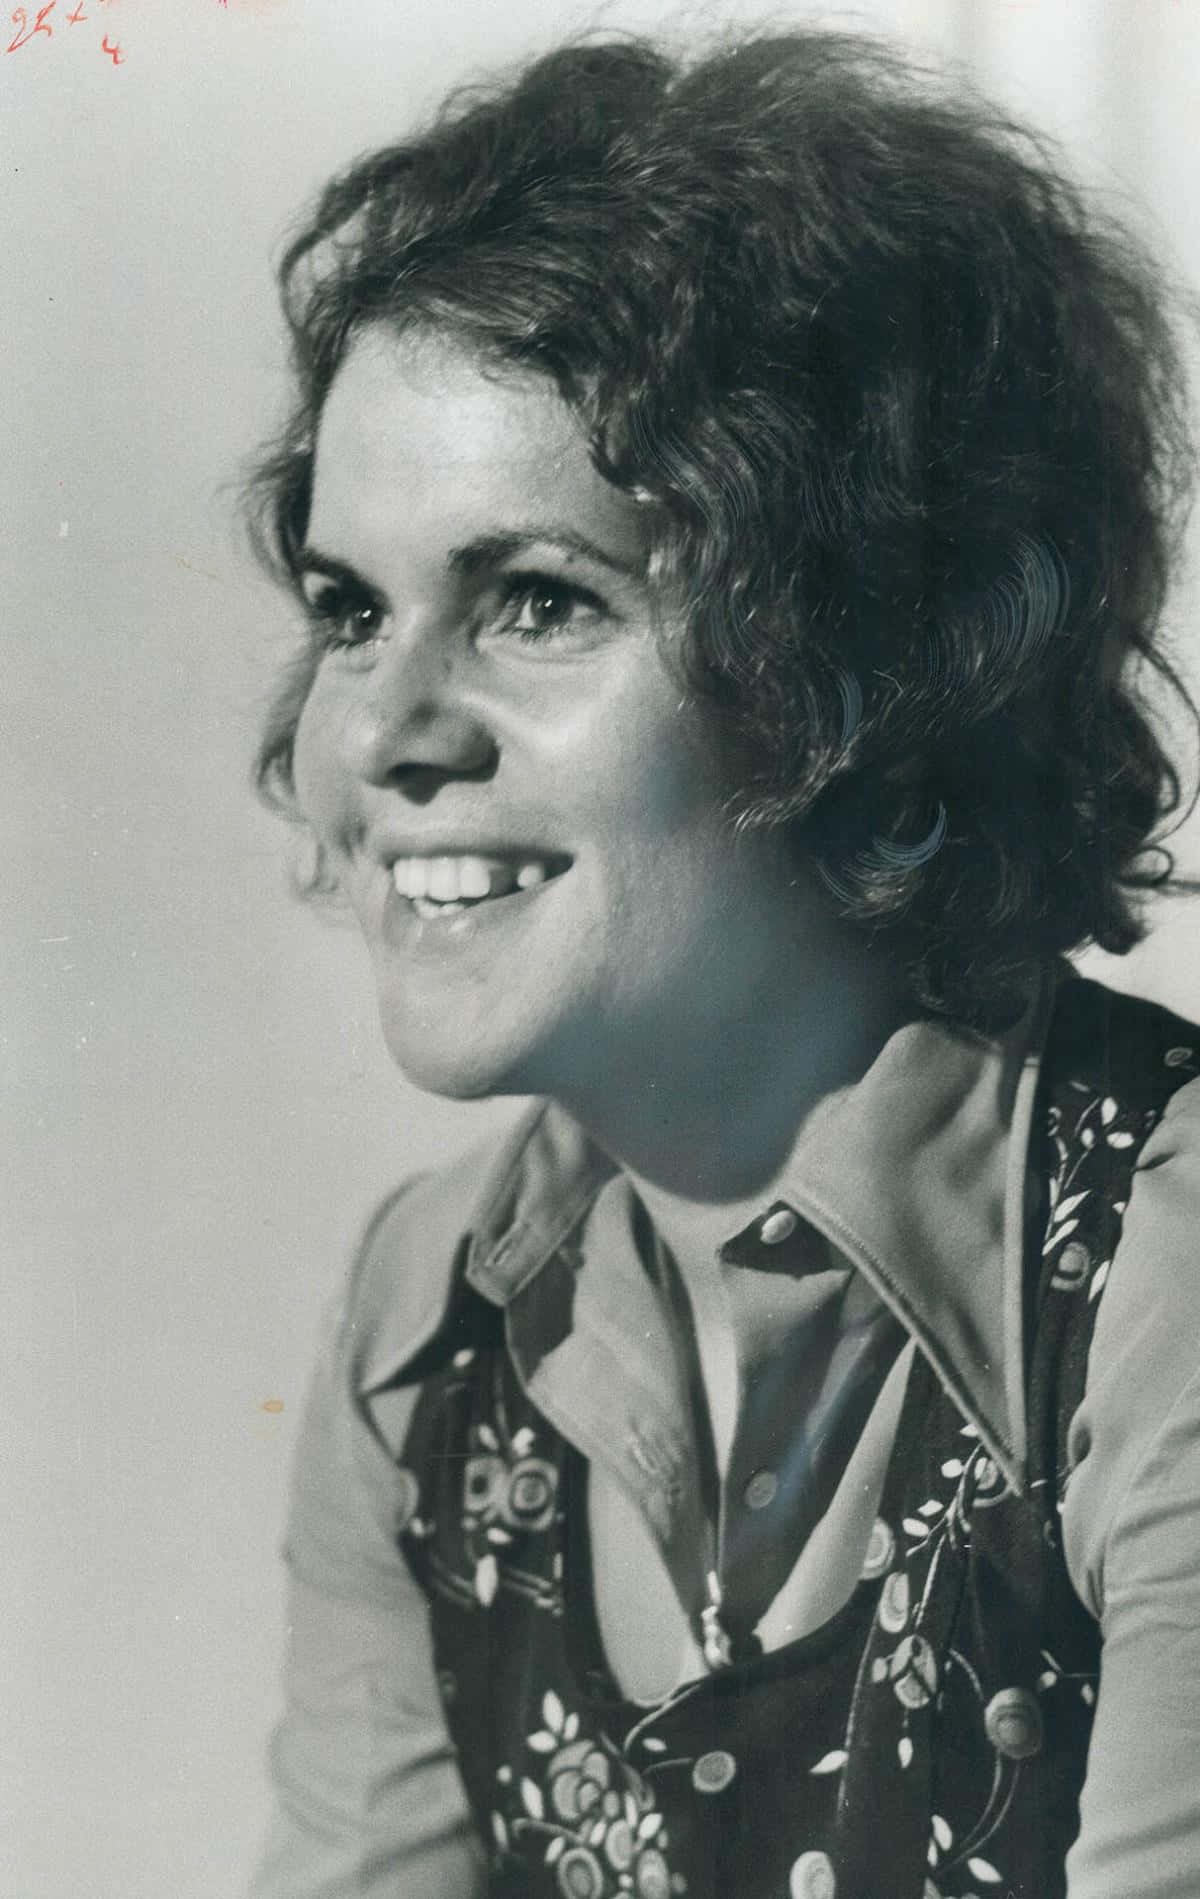 Gråskaligleende Unga Evonne Goolagong Cawley. (this Sentence Seems Incomplete As It Lacks Context. If The Task Is To Translate It Within The Context Of Computer Or Mobile Wallpaper, It Would Be Helpful To Have More Information To Provide An Accurate Translation.) Wallpaper